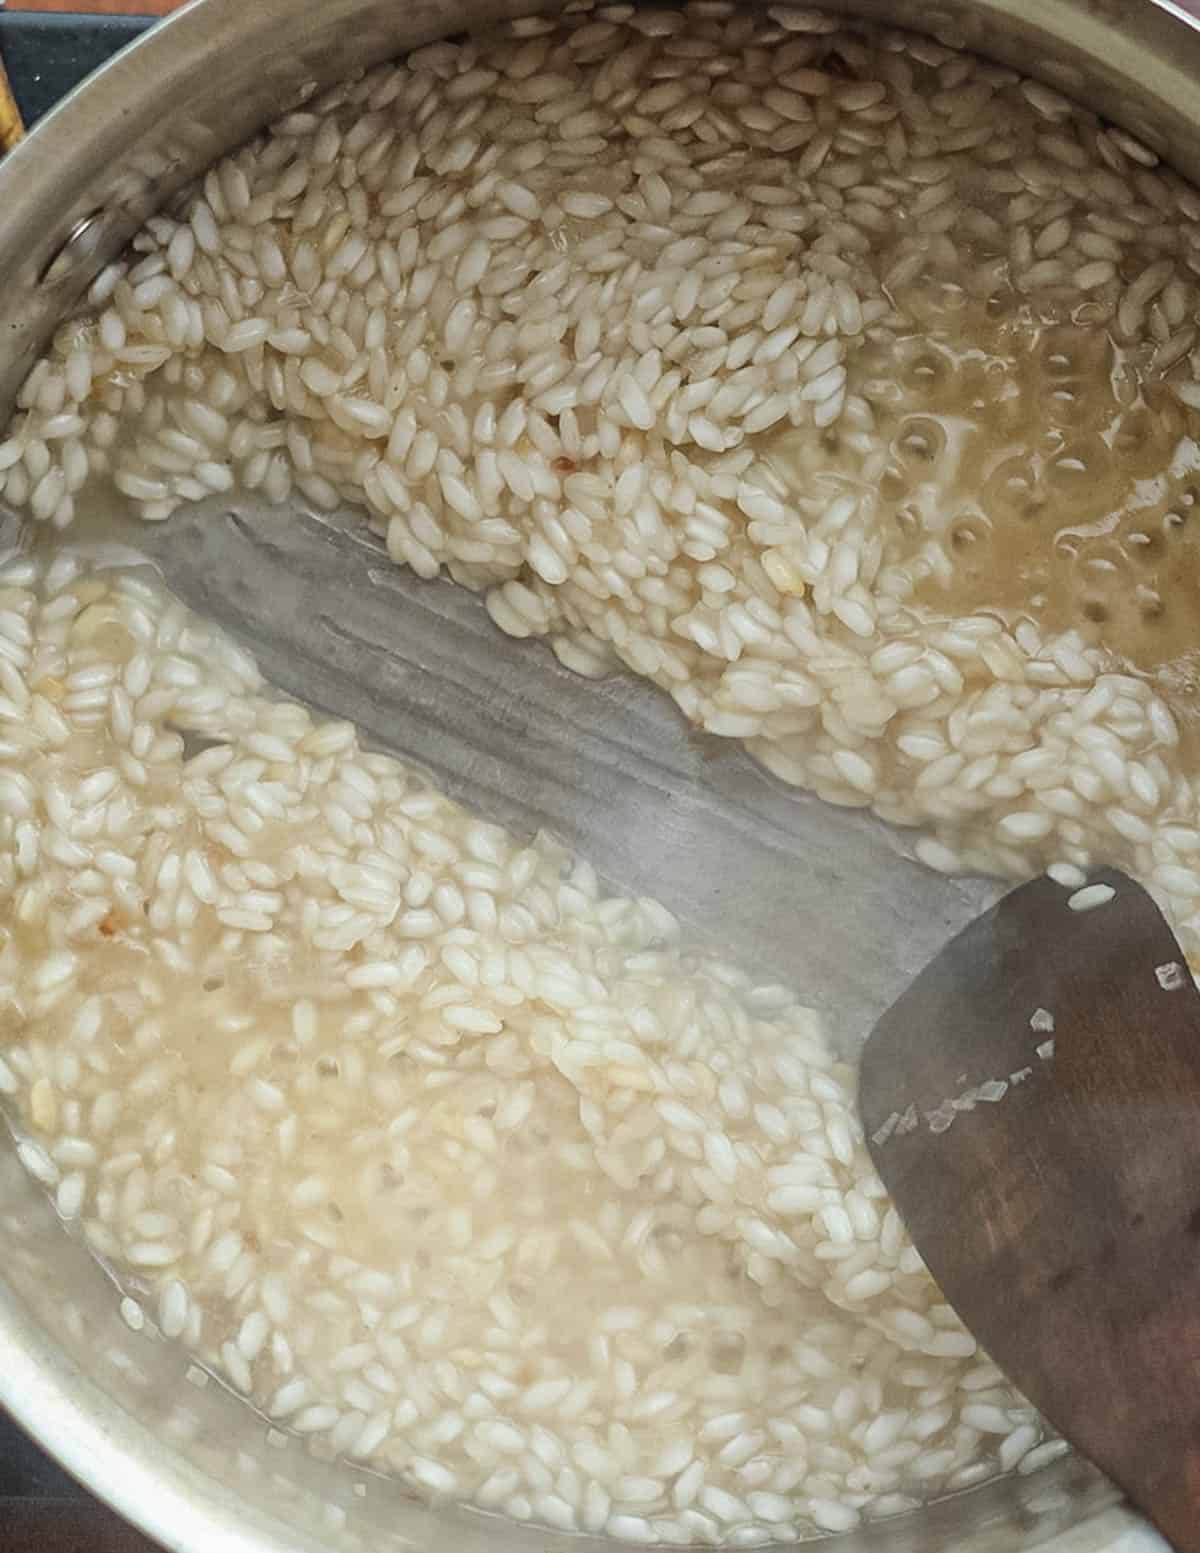 A spatula being dragged through a pan of cooking risotto rice.